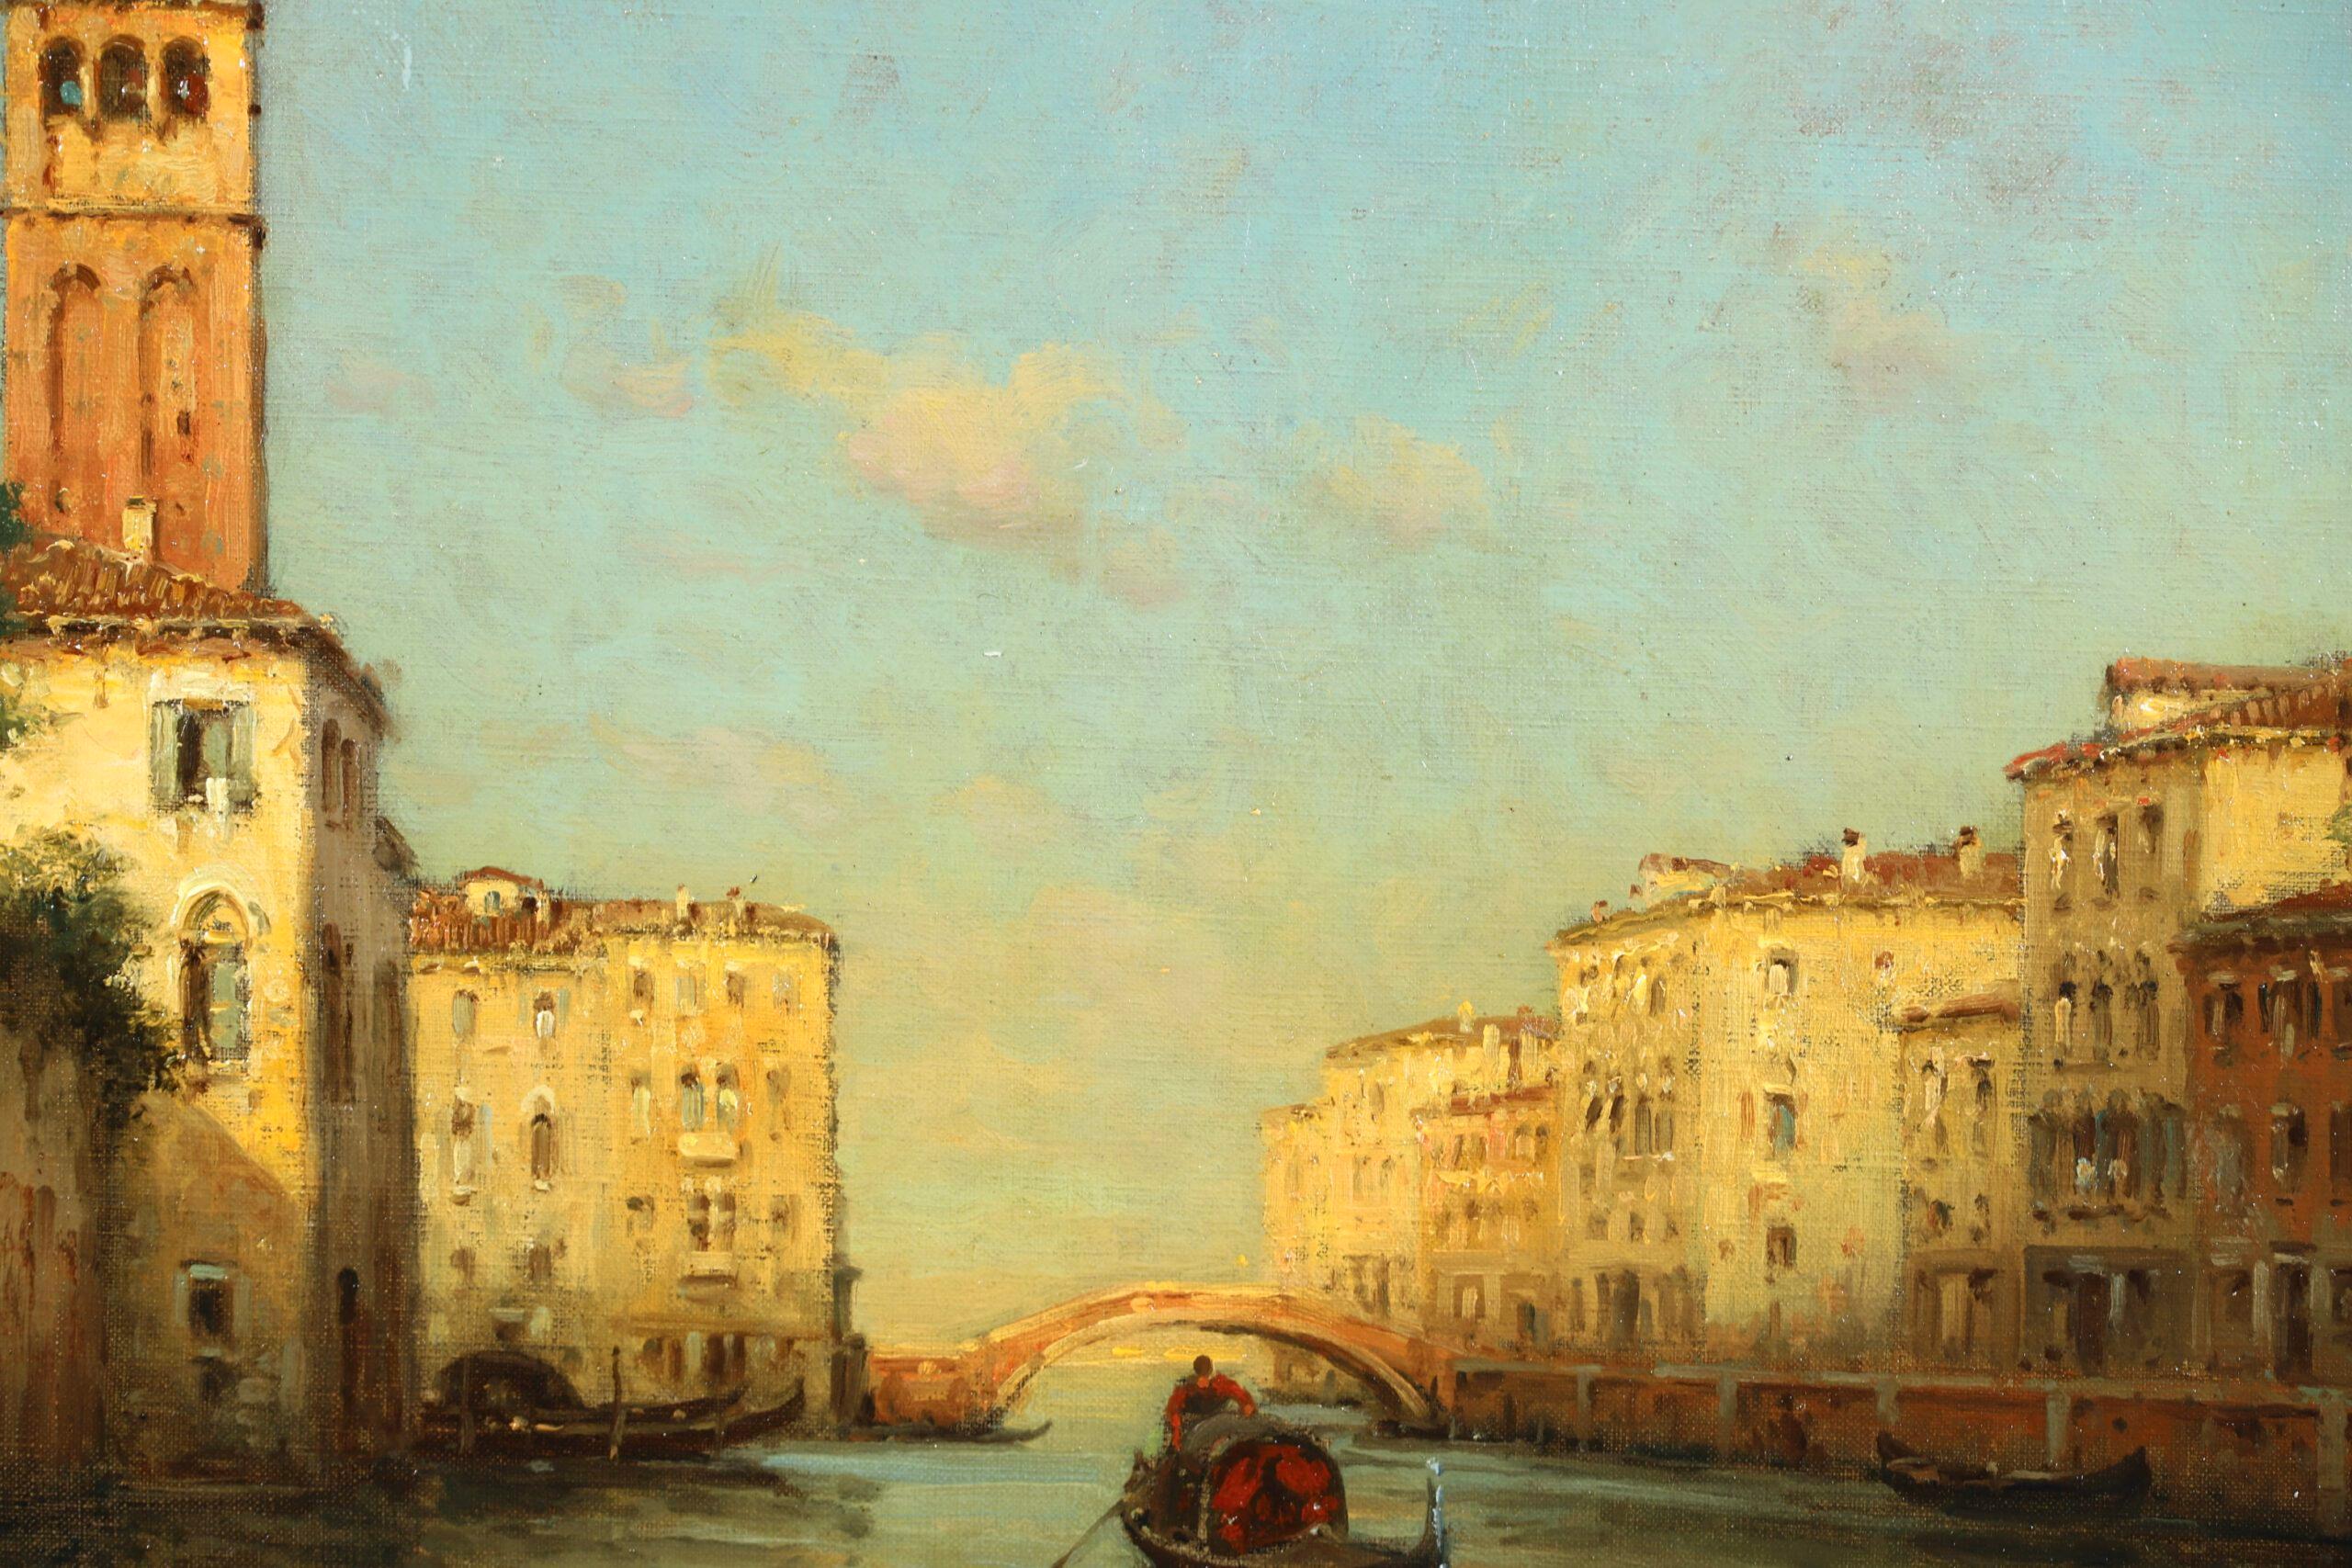 Gondolier on a Canal - Impressionist Landscape Oil Painting by Antoine Bouvard For Sale 1